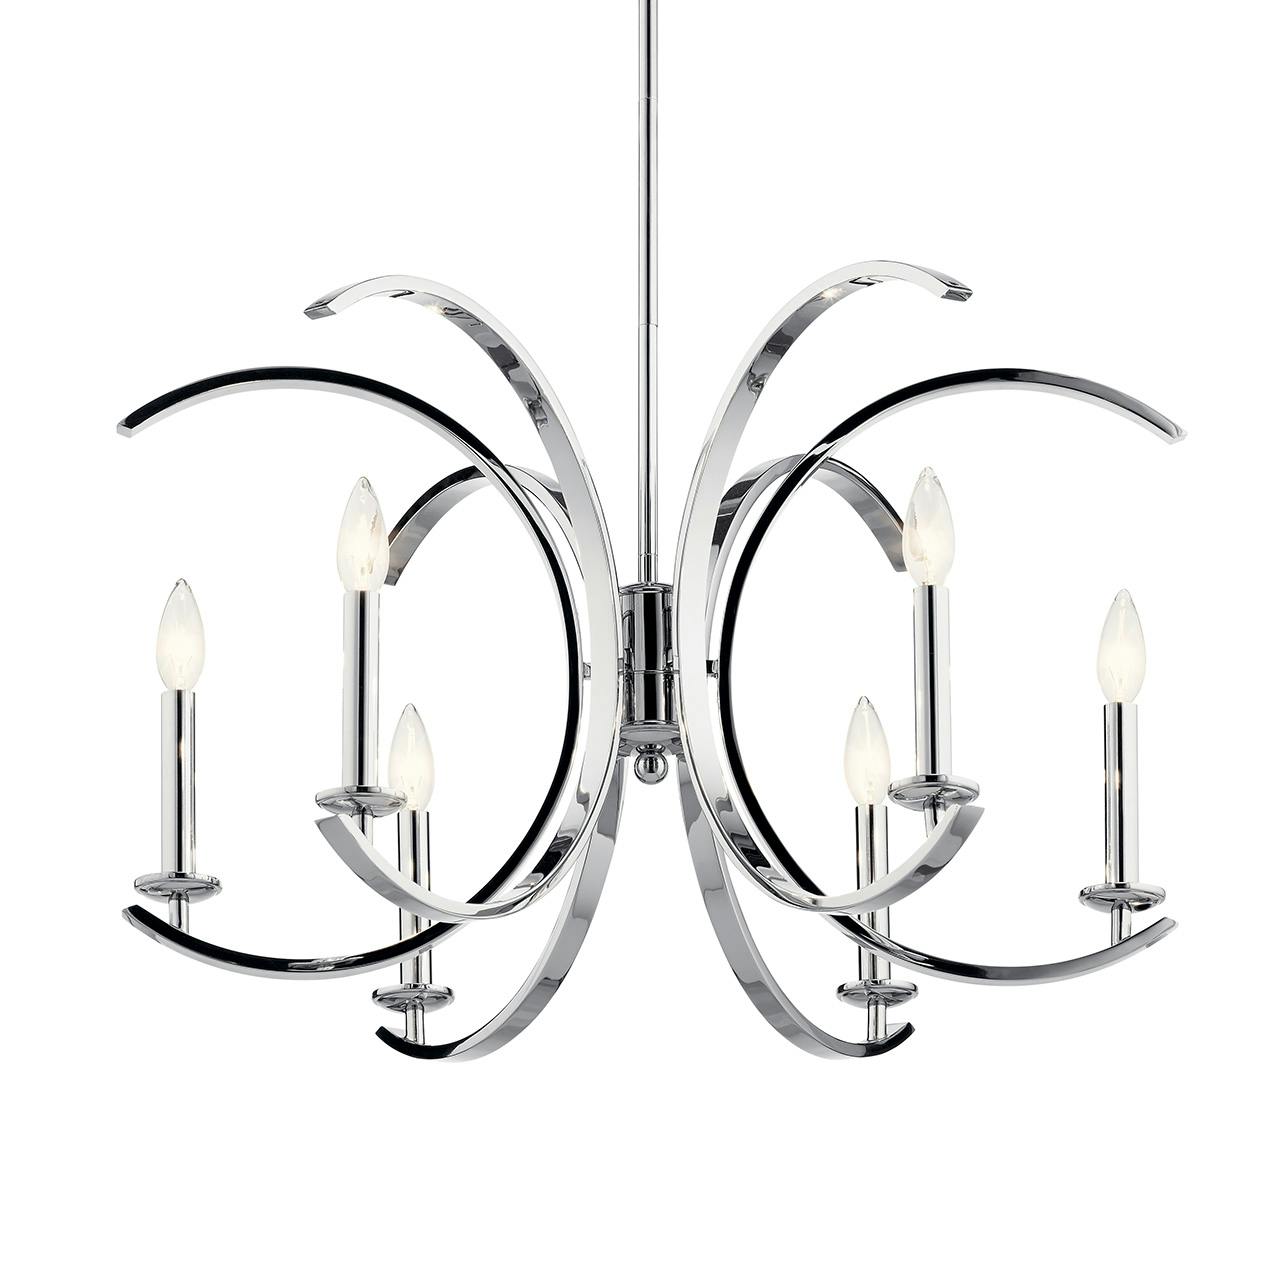 Cassadee 16.5" 6 Light Chandelier Chrome without the canopy on a white background